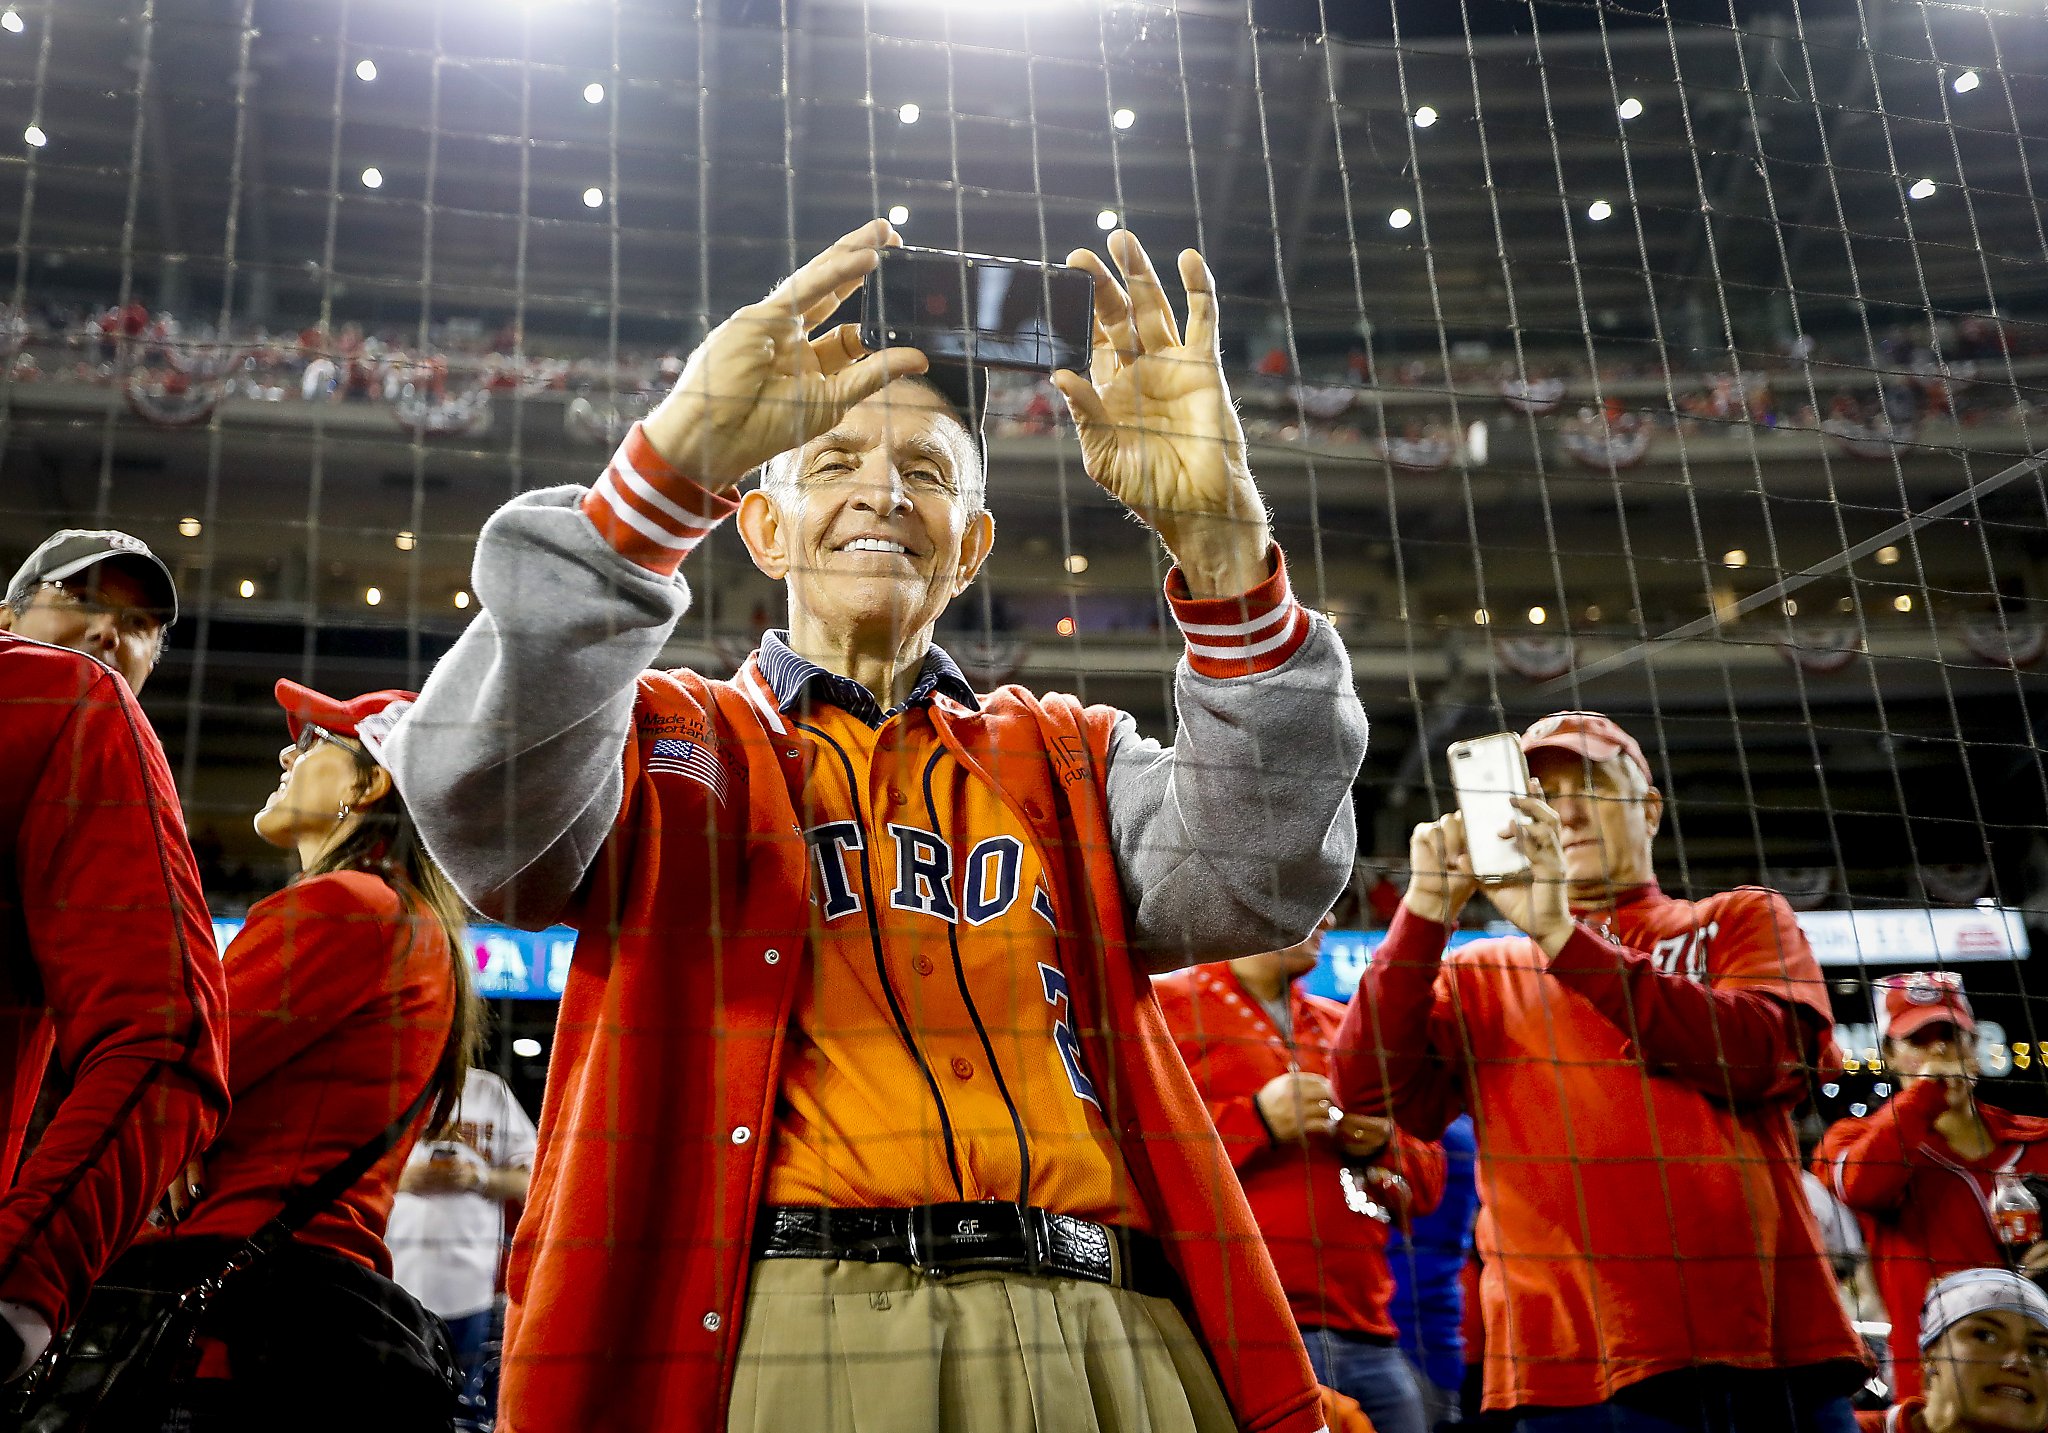 Super Bowl 2021 bets: Mattress Mack wagers $3.4 million on Buccaneers